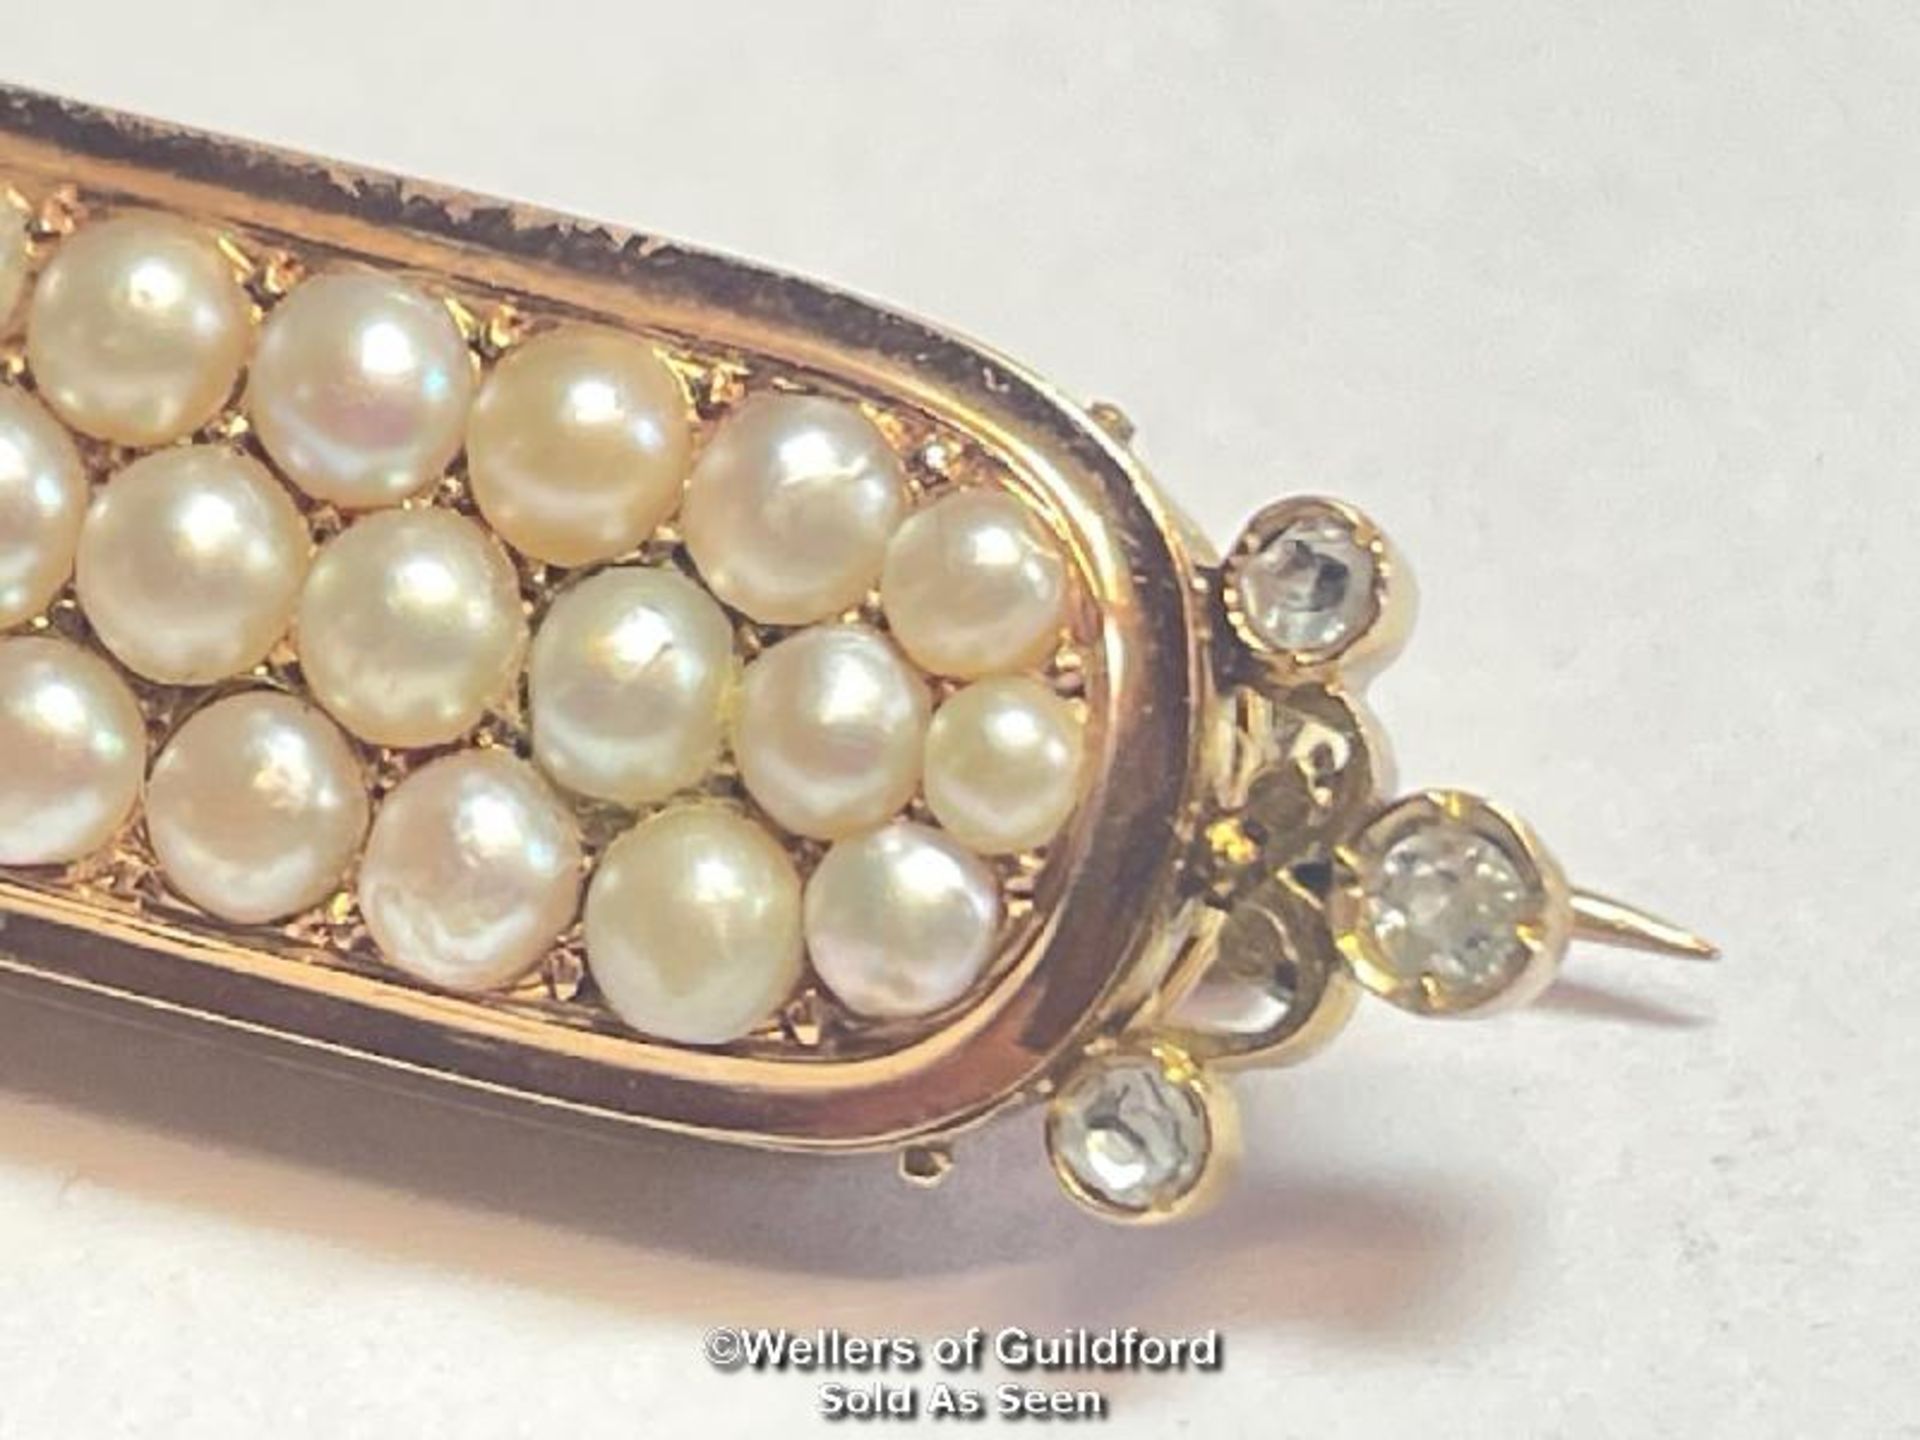 STOCK PIN IN YELLOW METAL WITH THREE ROWS OF SPLIT PEARLS AND ROSE CUT DIAMOND TERMINATIONS, NOT - Image 3 of 5